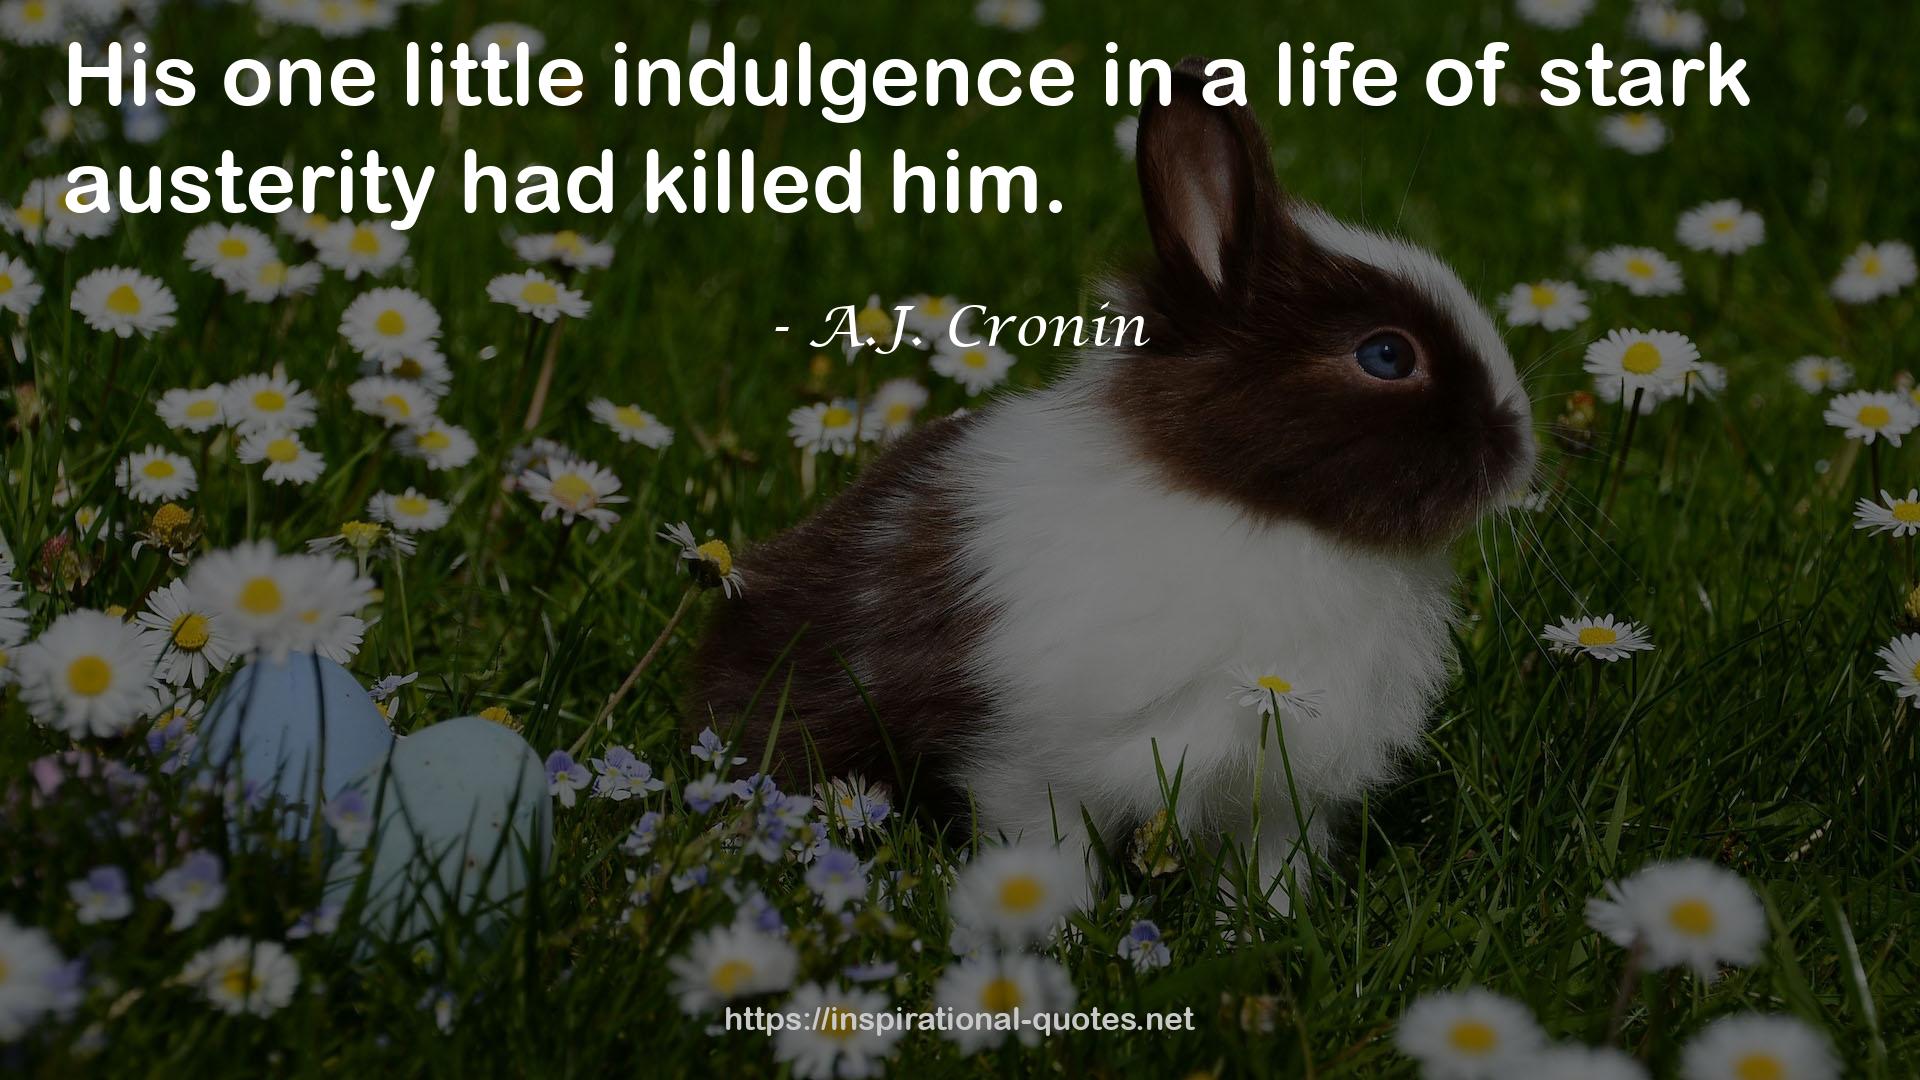 A.J. Cronin QUOTES